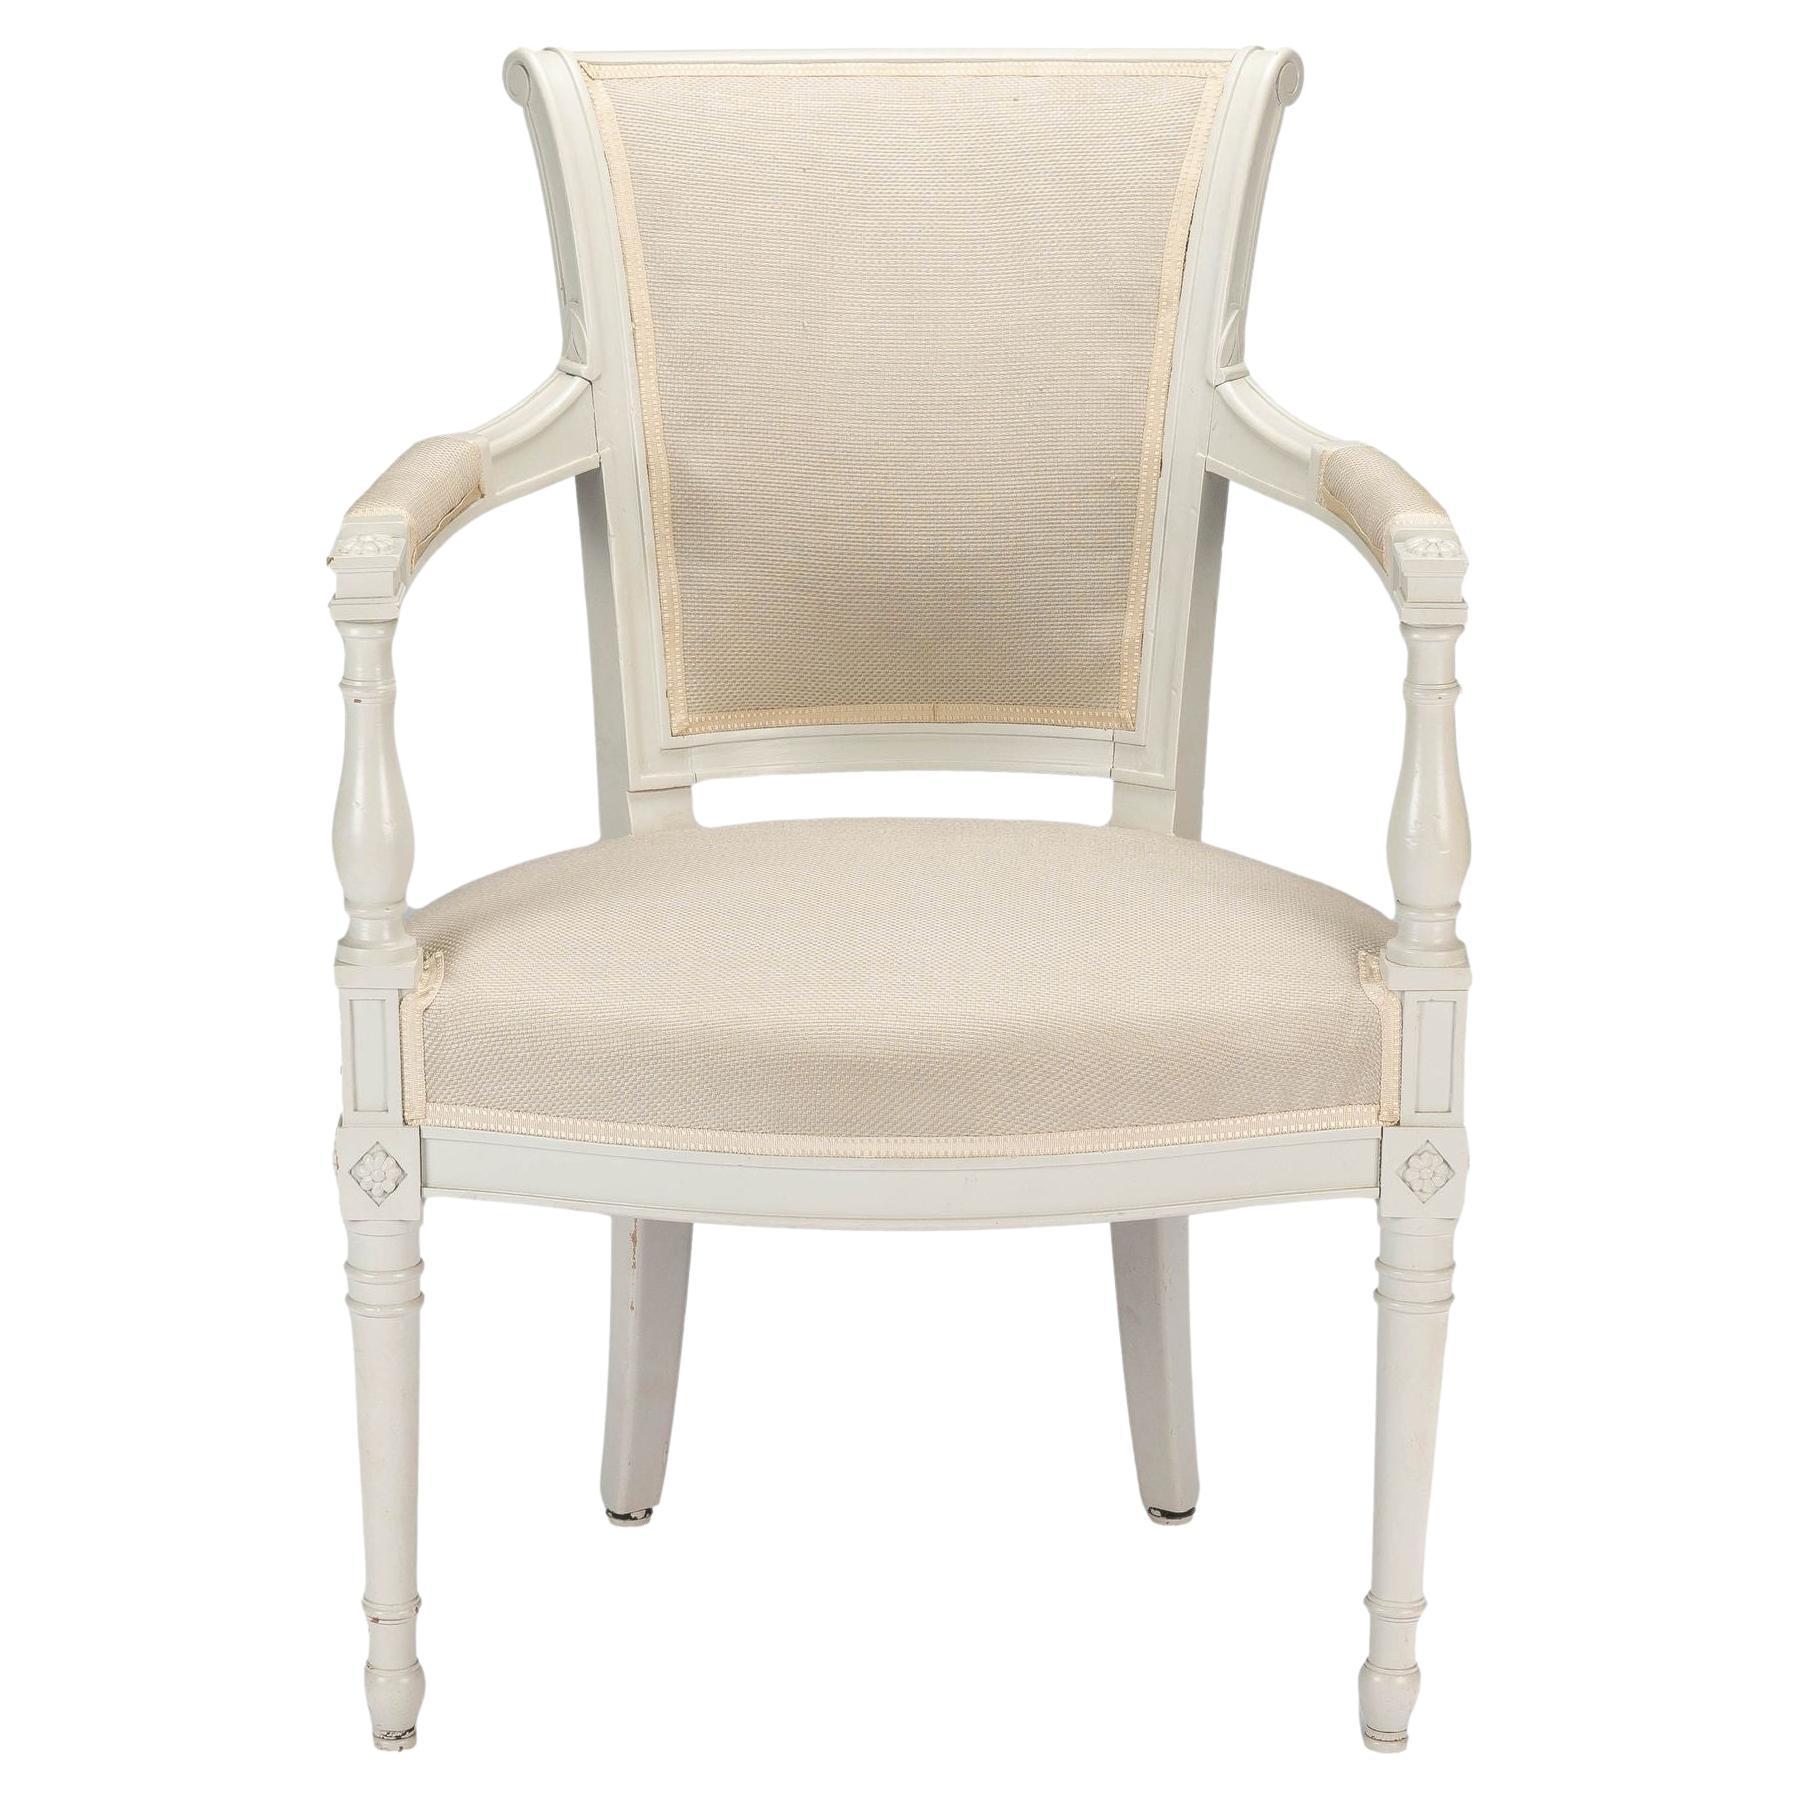 French Louis XVI Style Painted & Upholstered Armchair, c. 1910-30